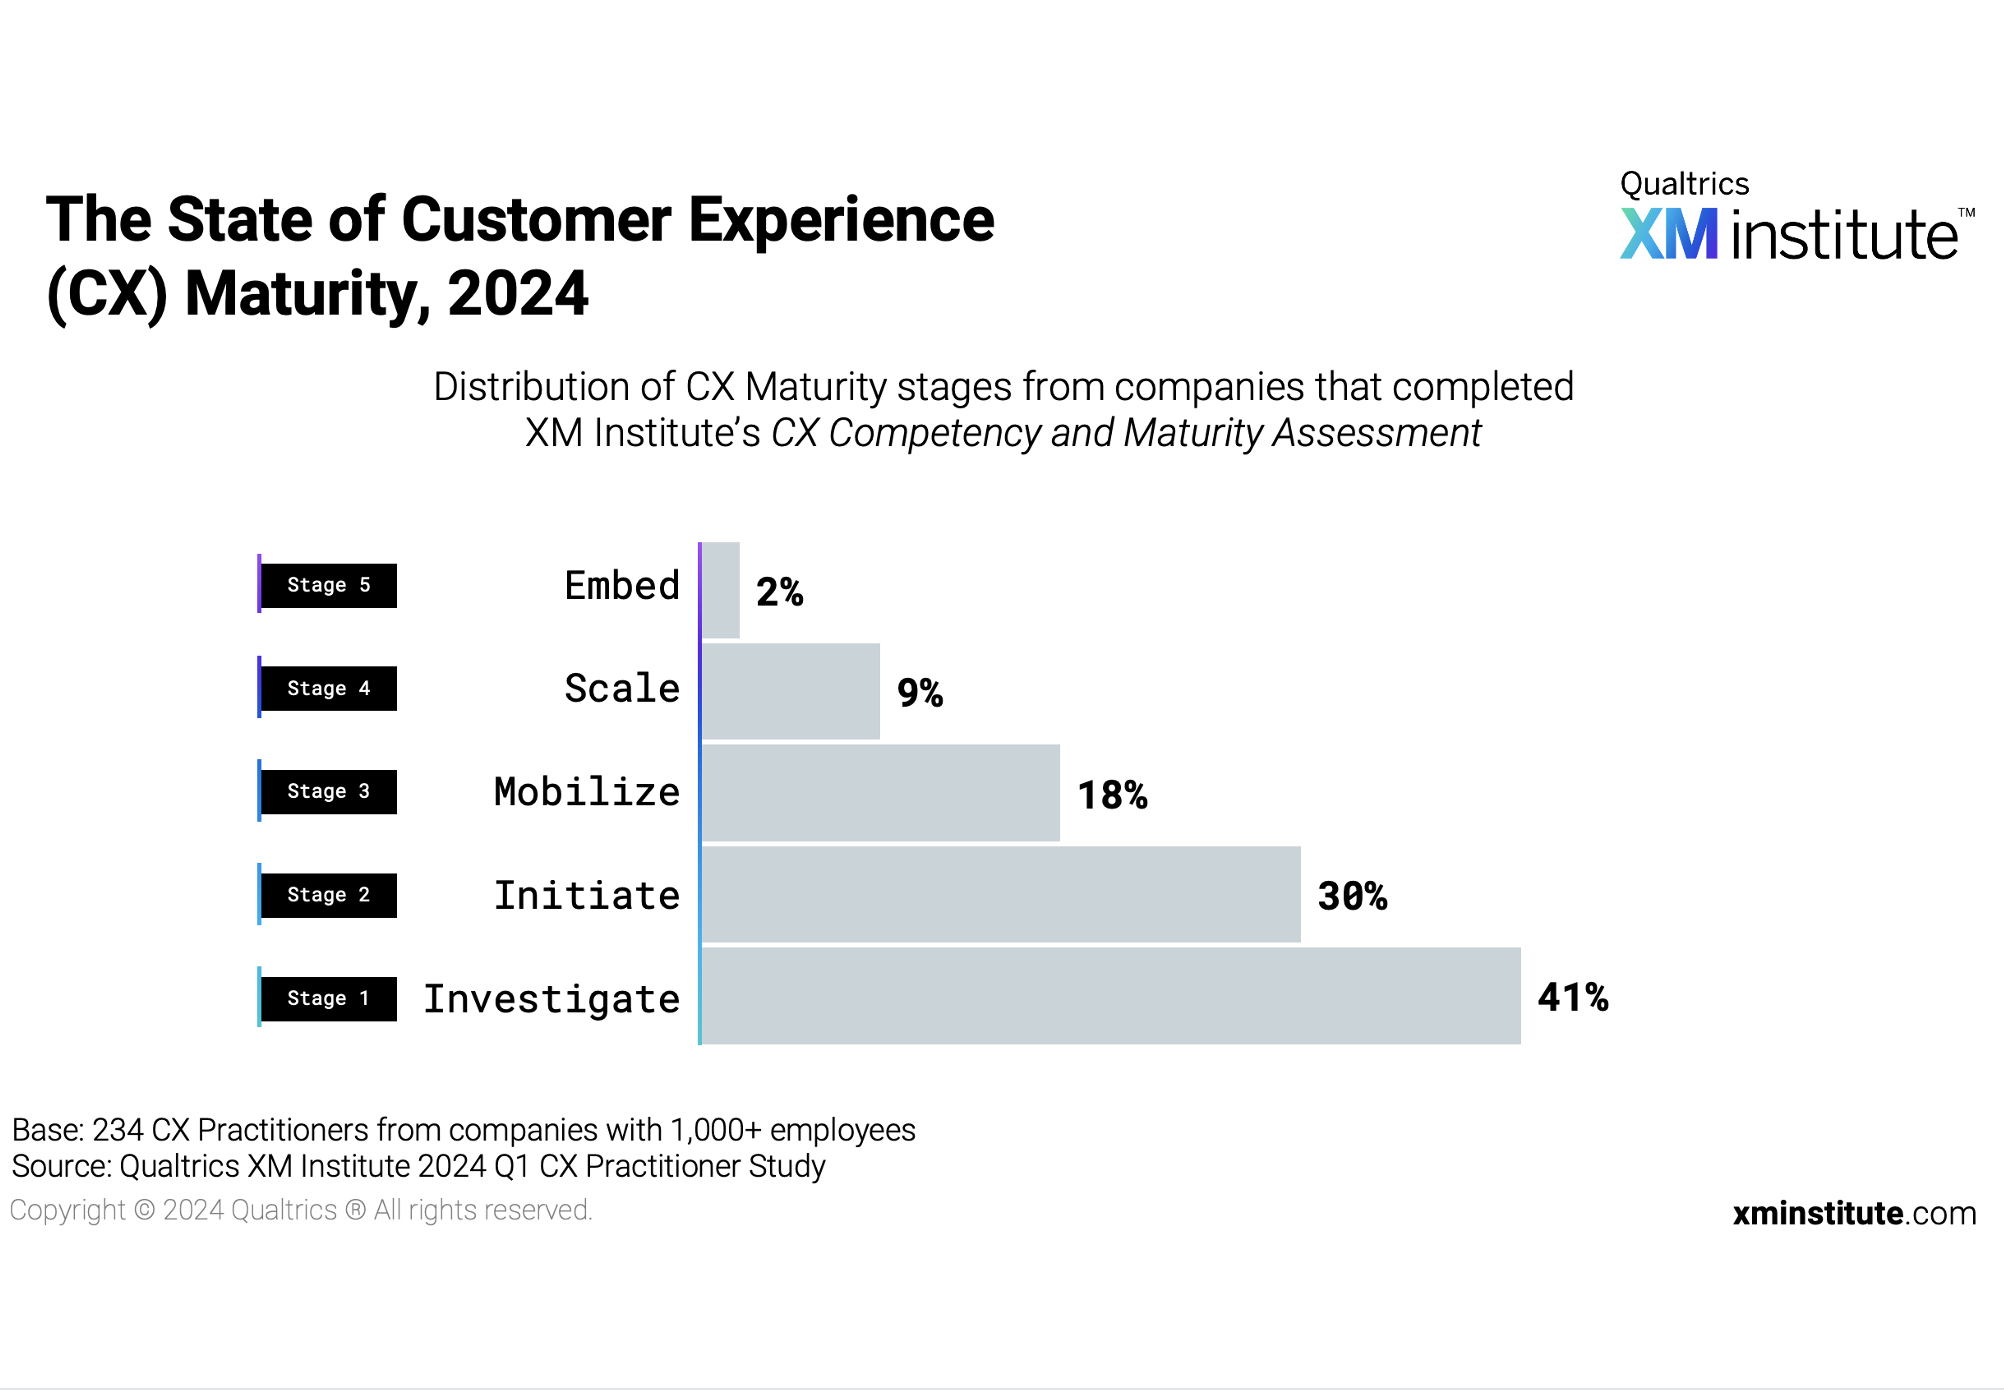 The State of Customer Experience (CX) Maturity, 2024